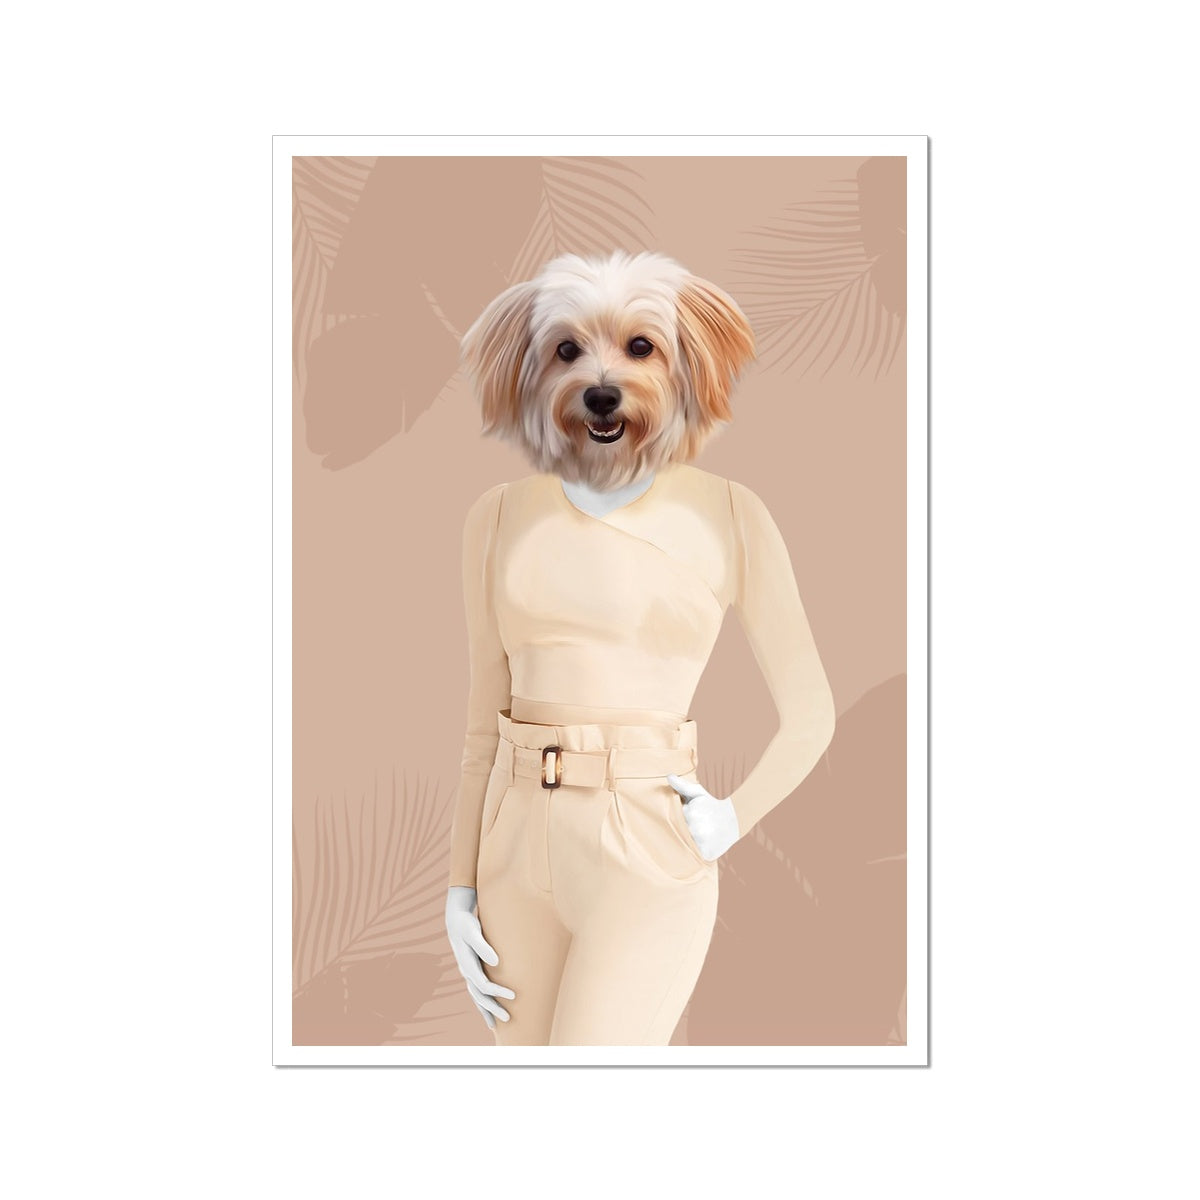 The Gina (Real Housewives of Orange County): Custom Pet Portrait